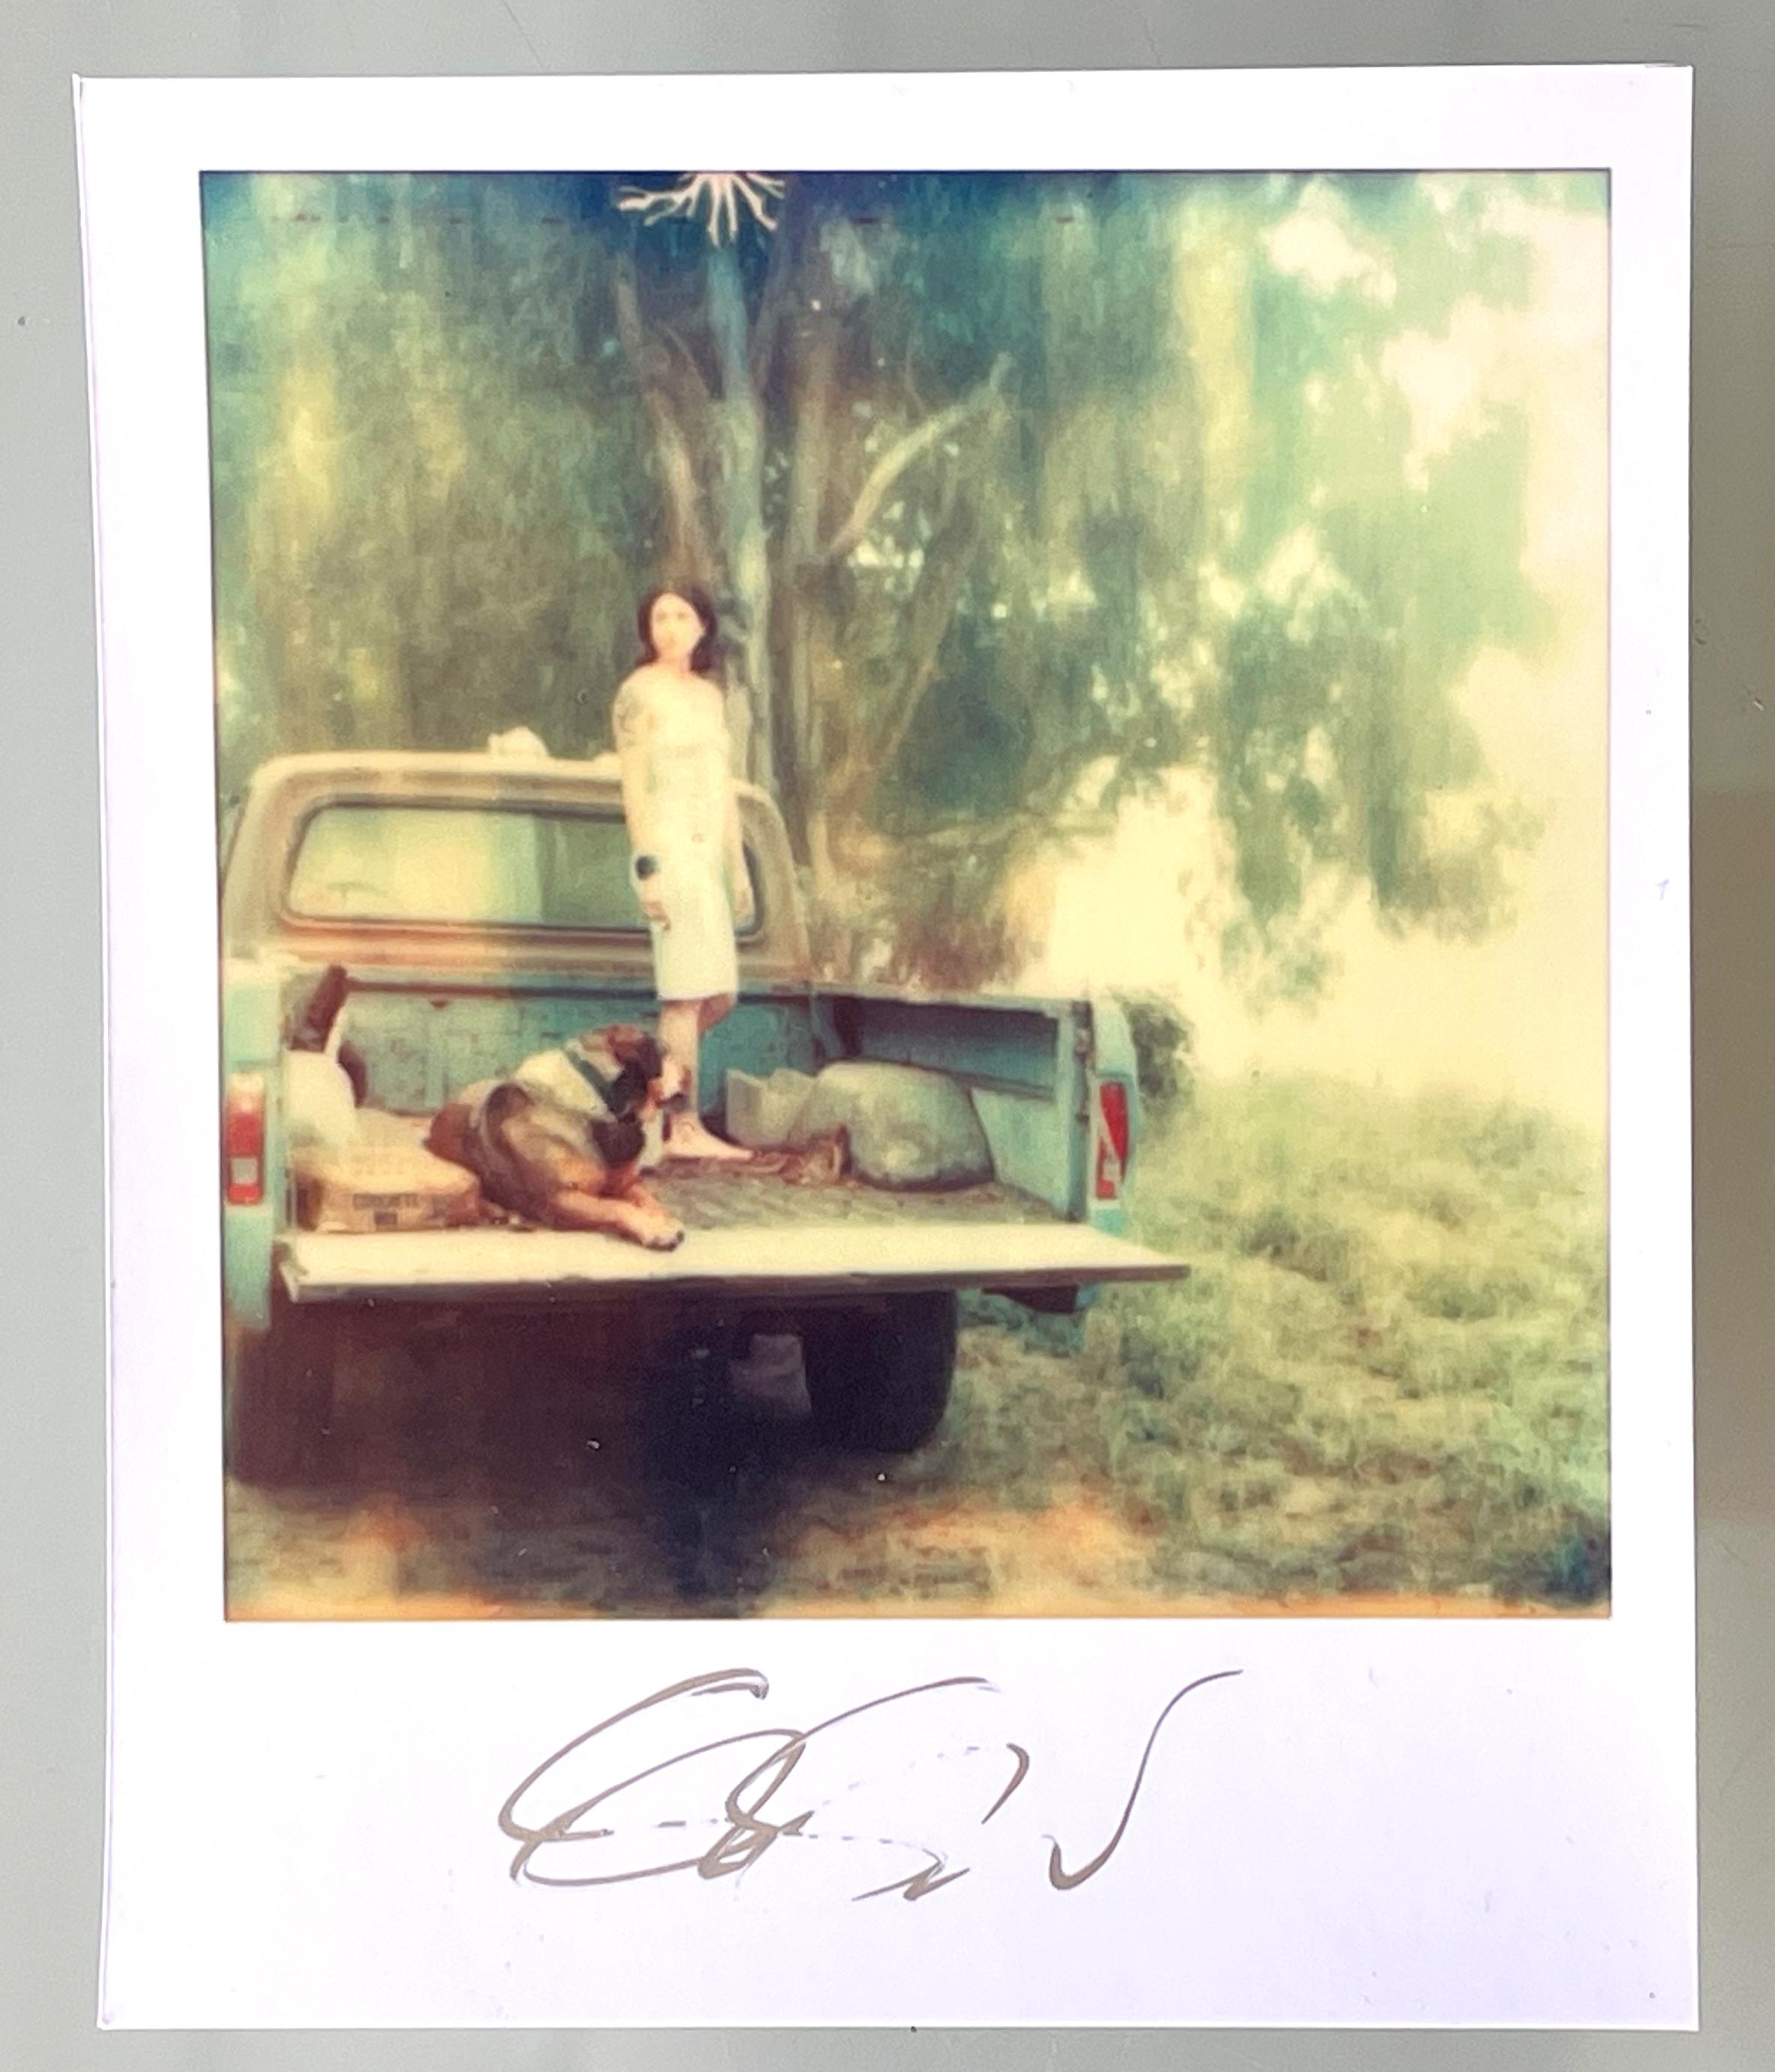 Stefanie Schneider's Mini
Saigon (Stranger than Paradise) - 2003

signed in front, not mounted.
Digital Color Photographs based on a Polaroid.

Polaroid sized open Editions 1999-2023
10.7 x 8.8cm (Image 7.9x7.7cm)
